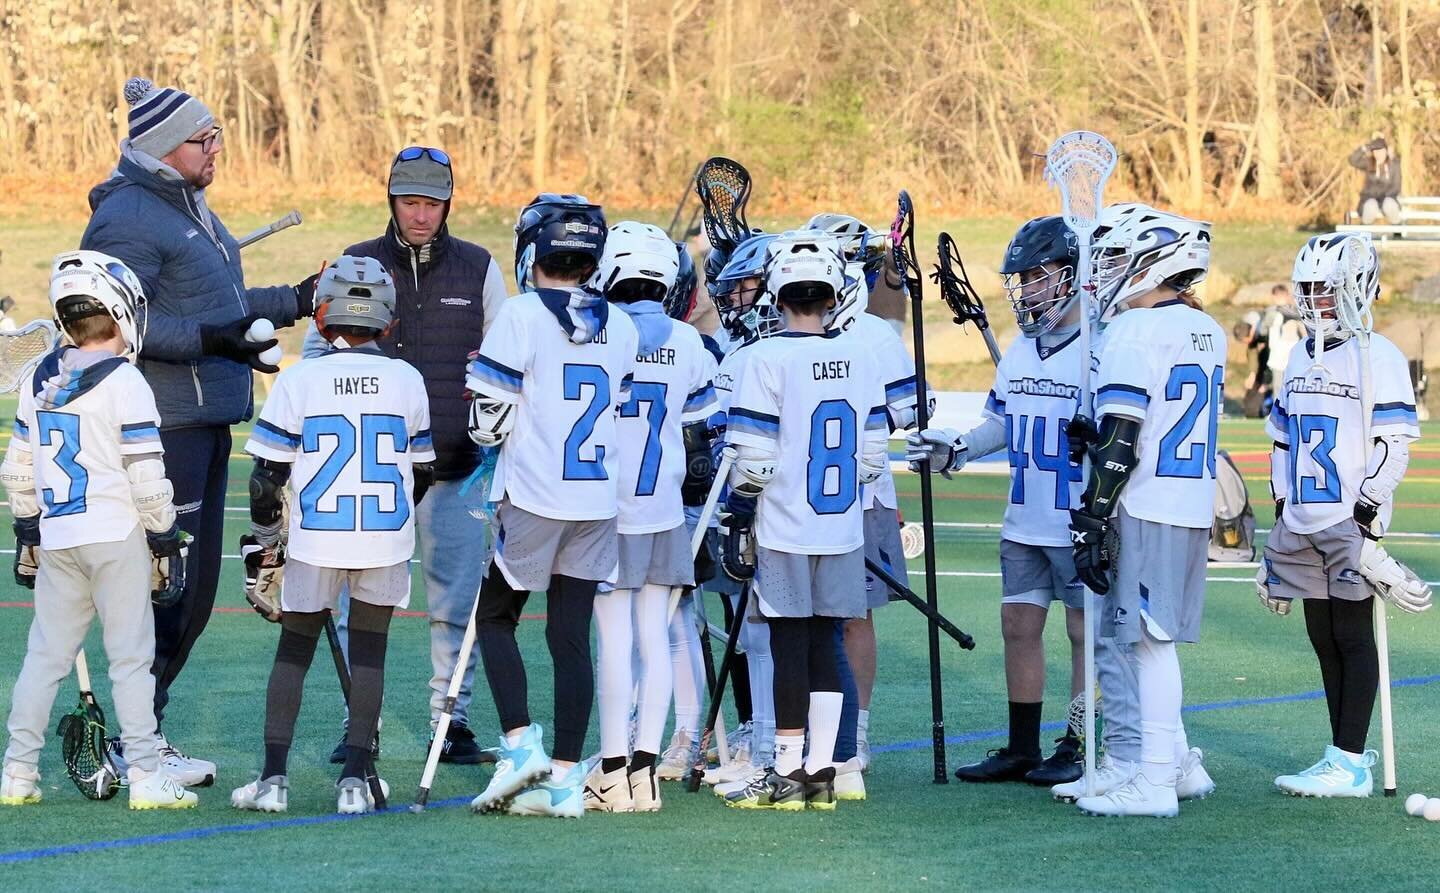 🌊 #SouthShore2031 off to a strong opening weekend at #NXTSPRINGLEAGUE

📸 @mcmomma3